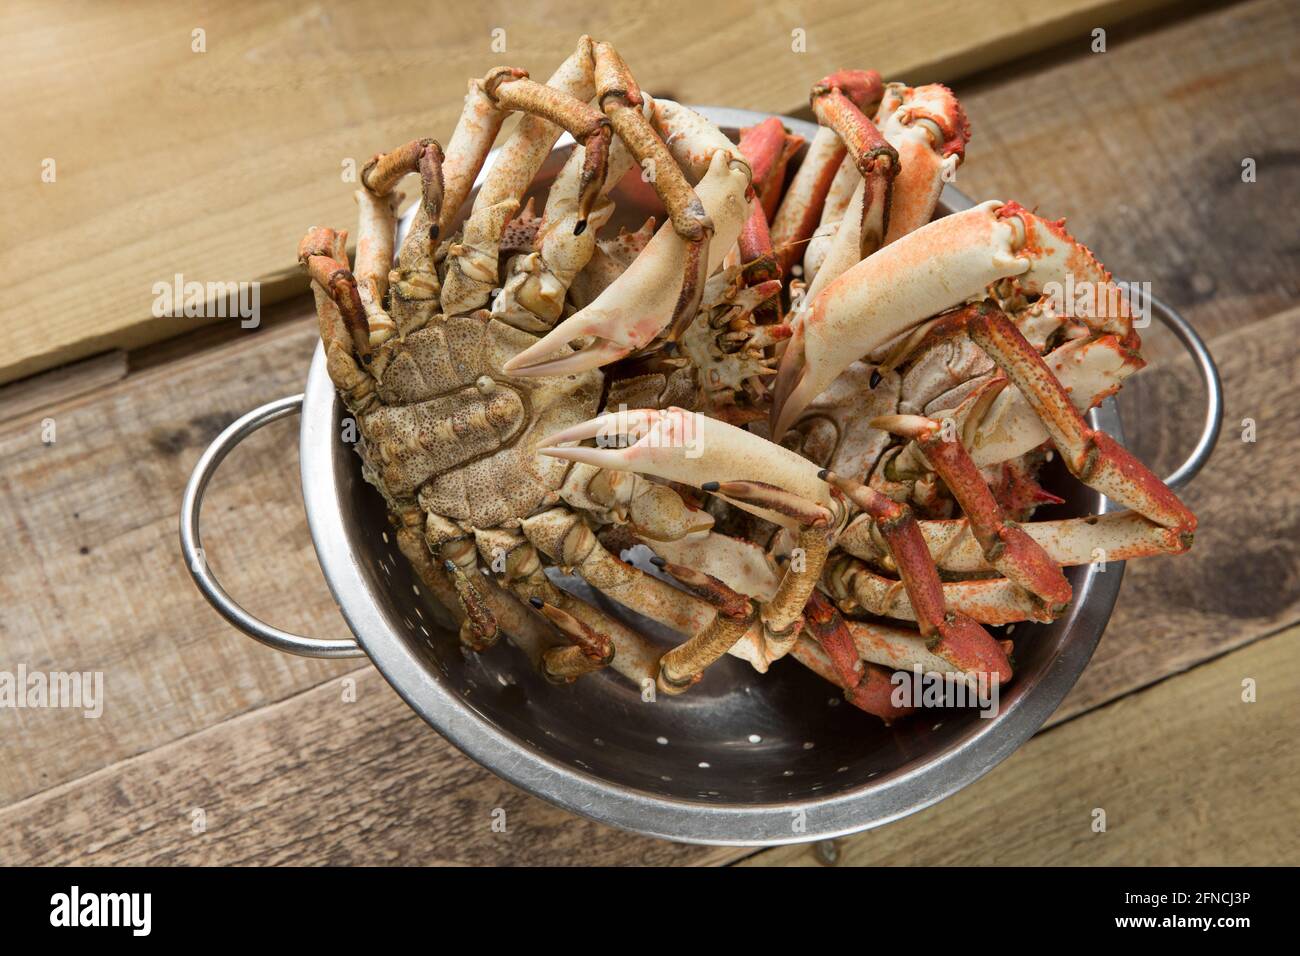 Two boiled, cooked spider crabs, Maja brachydactyla, that have been left to cool after cooking, Spider crabs are common in parts of the UK and are bei Stock Photo